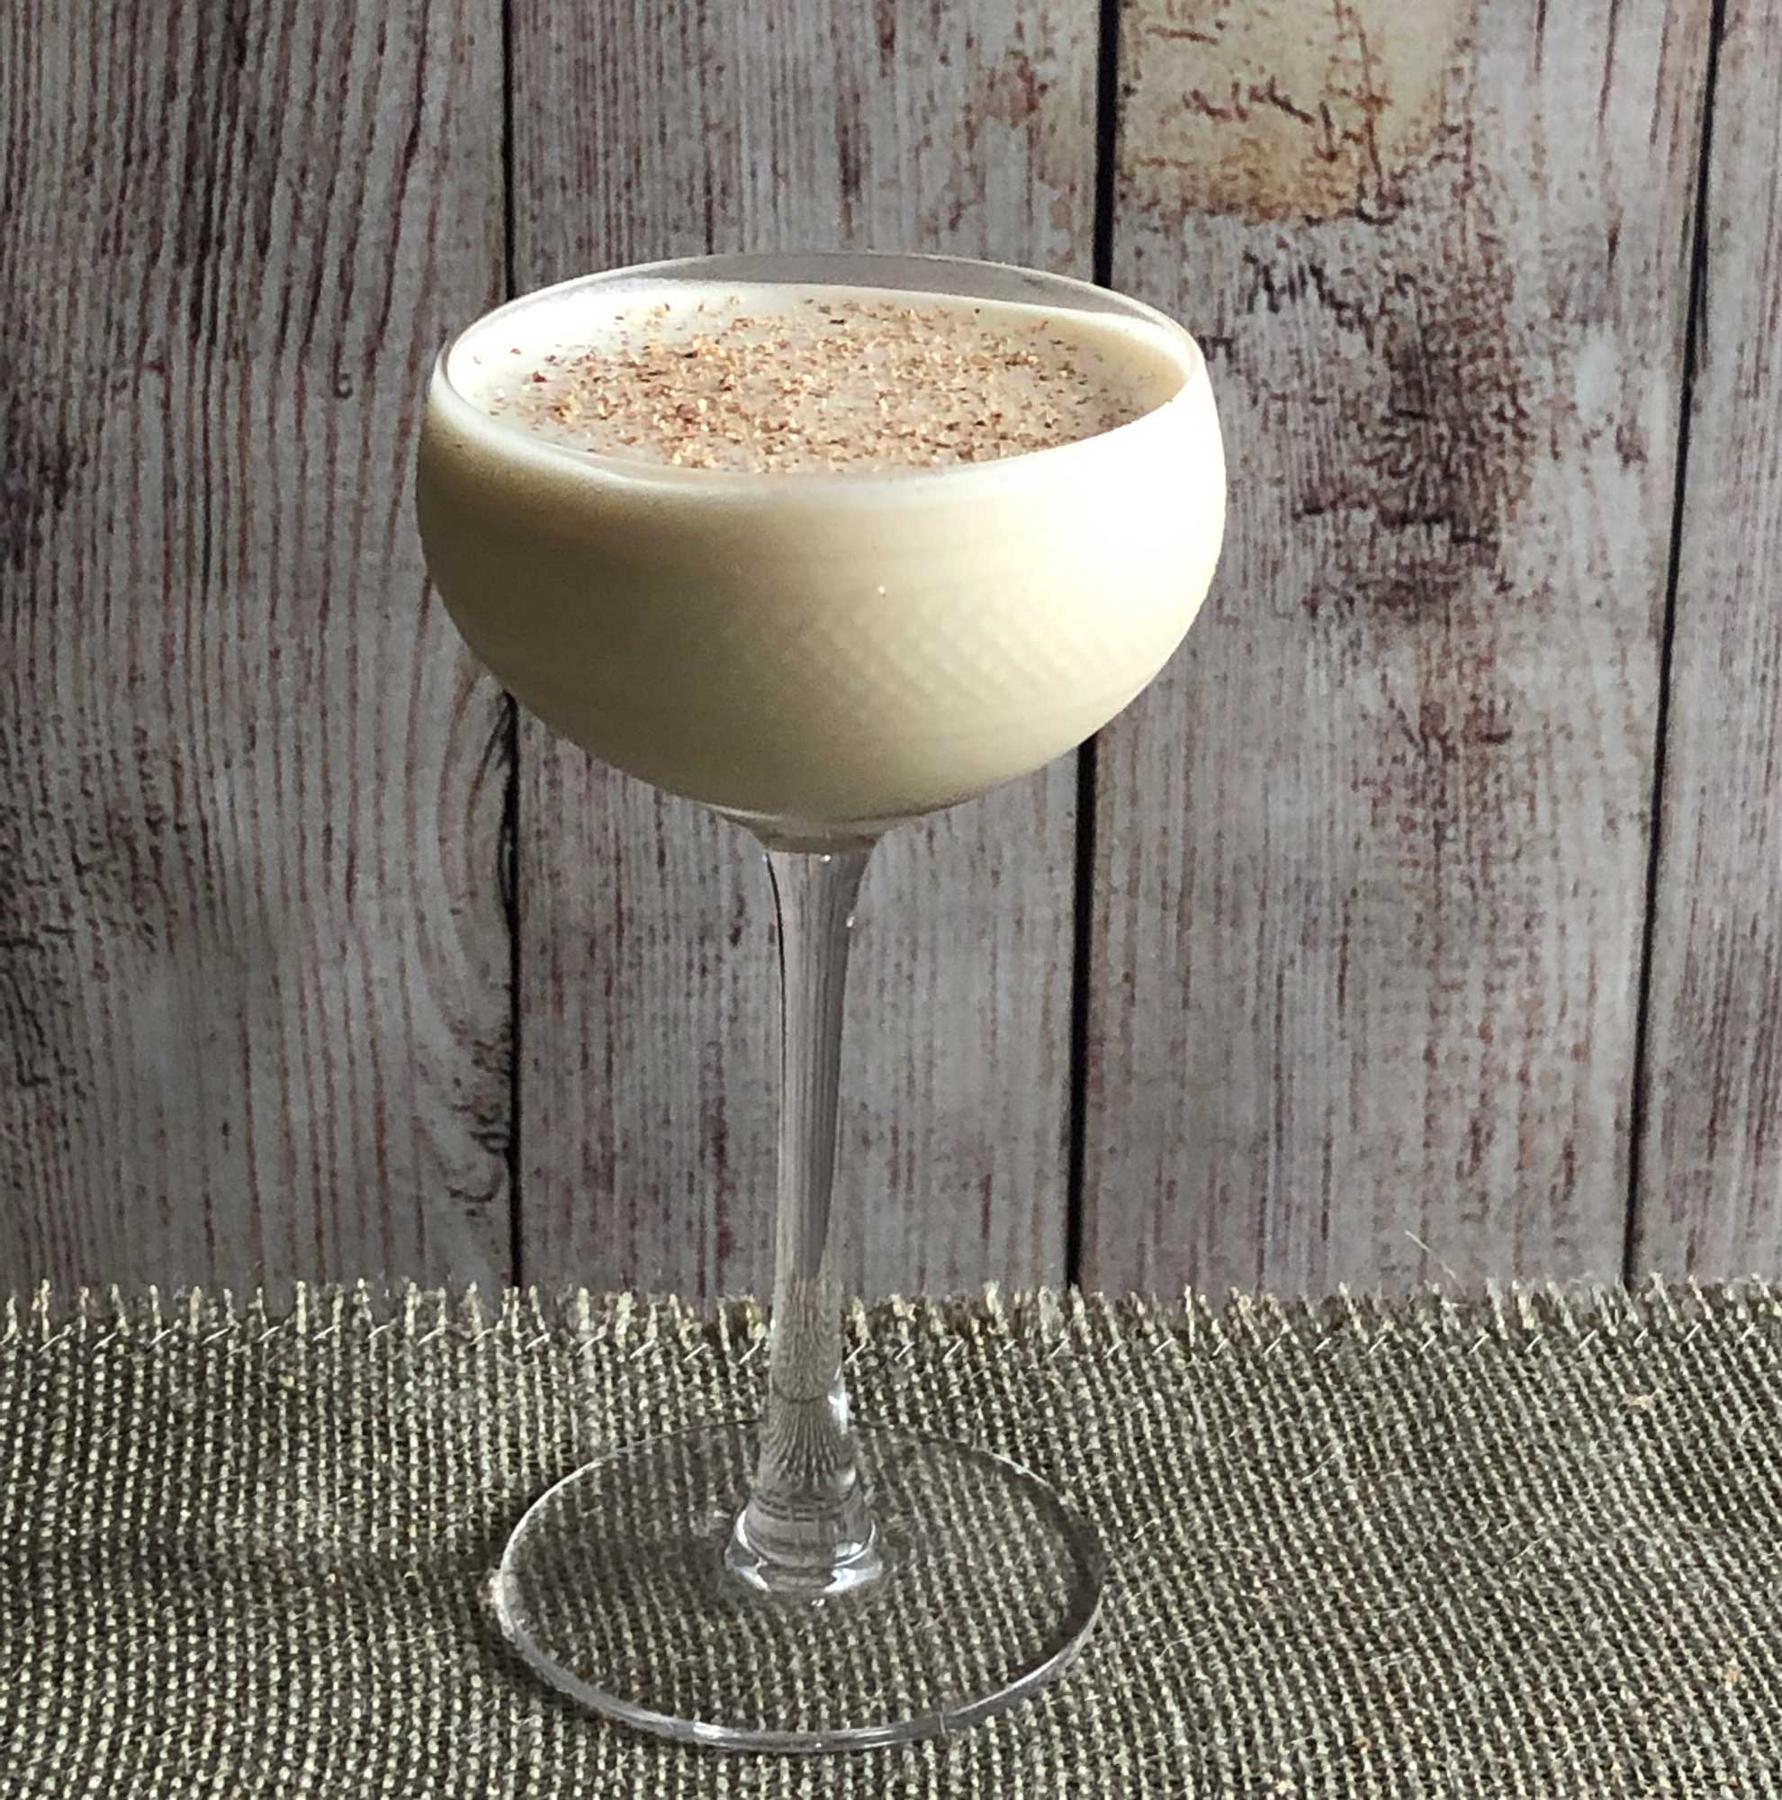 An example of the Génépy Suisse, the mixed drink (drink), by Ryan Maybee, Manifesto, Kansas City, Missouri, featuring Dolin Génépy le Chamois Liqueur, crème de cacao (white), coffee-flavored liqueur, cream, absinthe, and grated nutmeg; photo by Lee Edwards